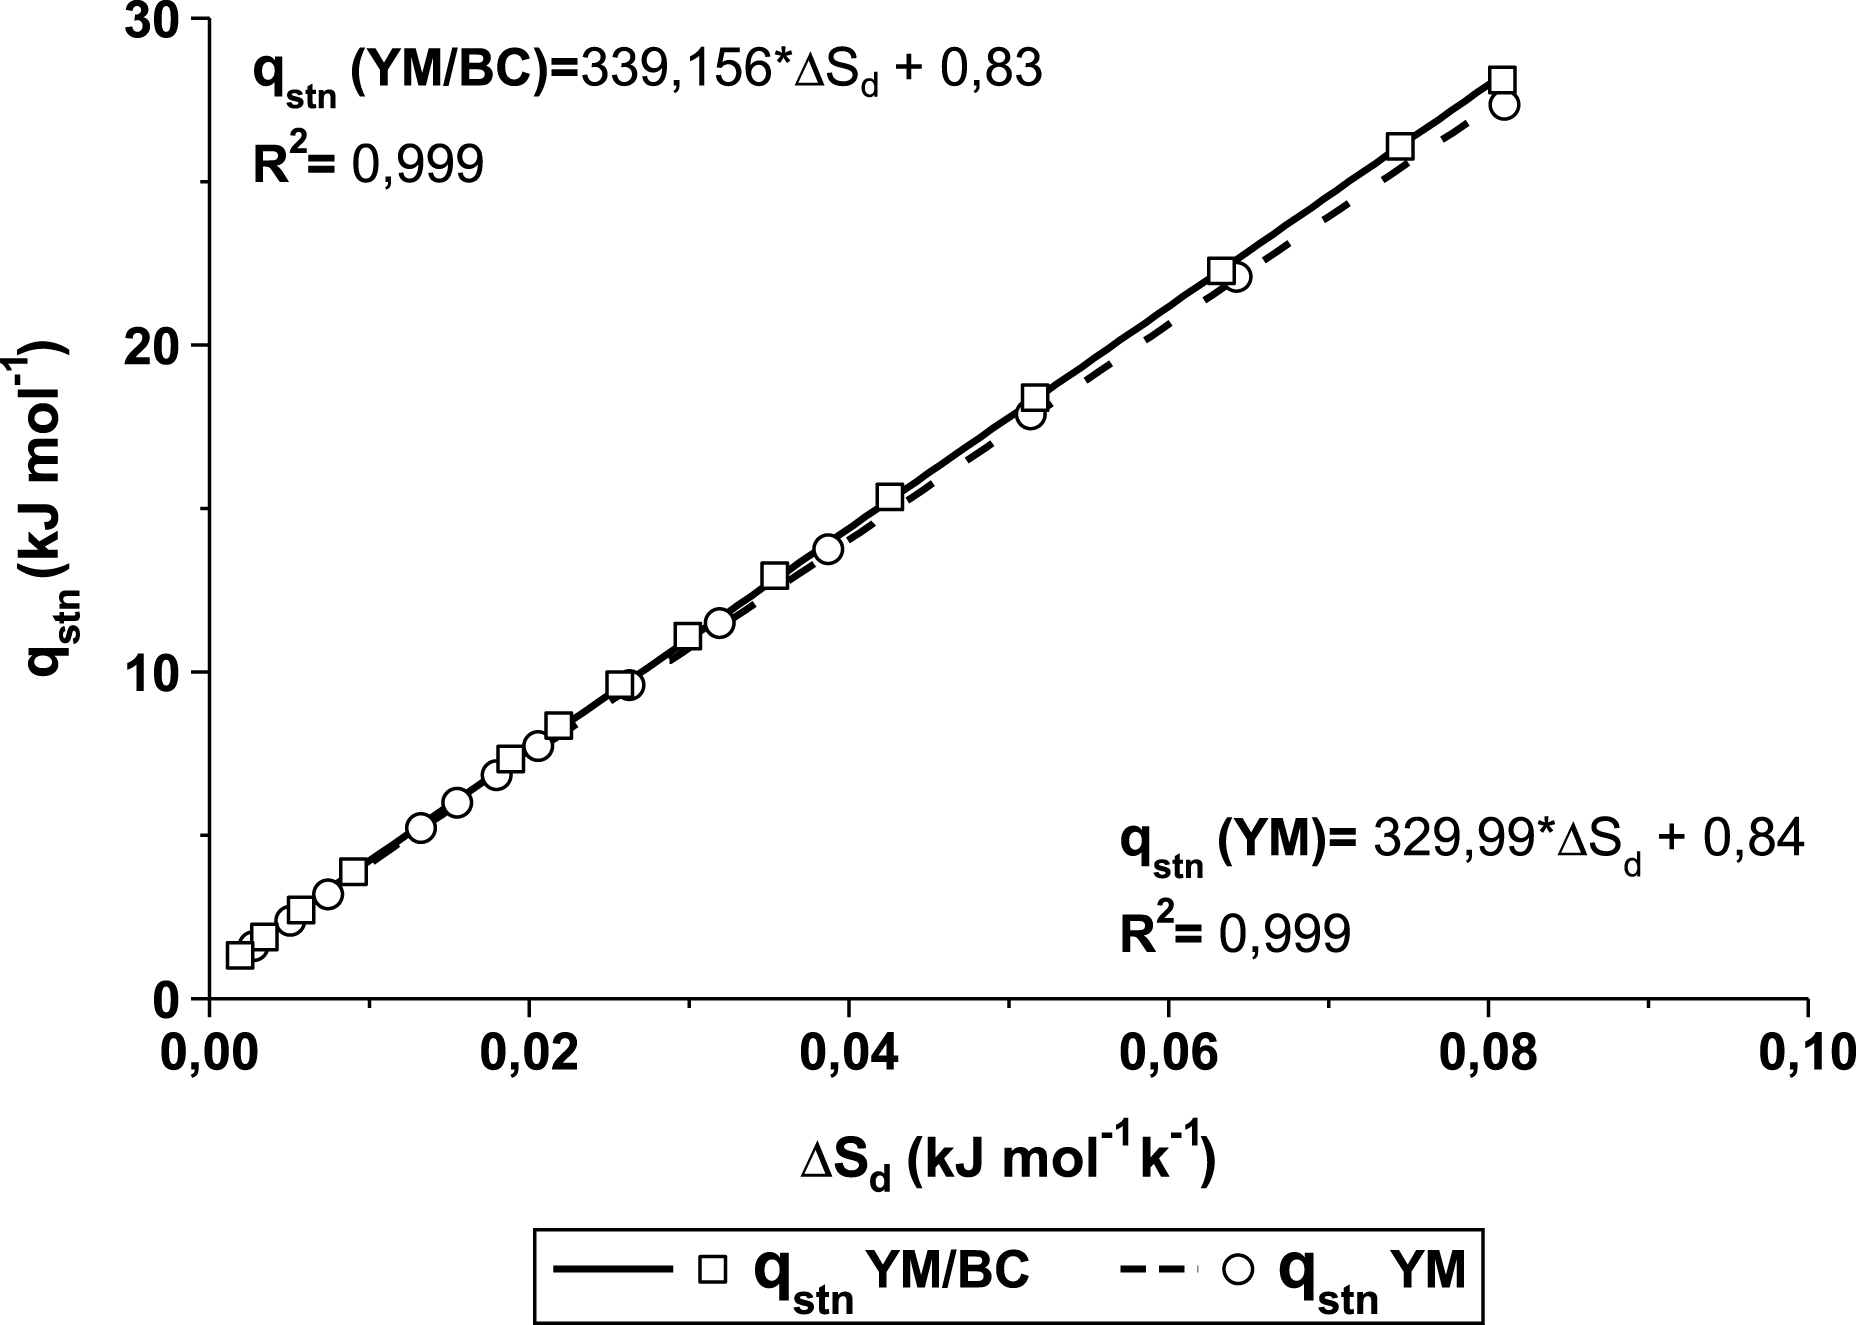 Enthalpy-entropy linear relationship for freeze-dried BC/YM and YM.